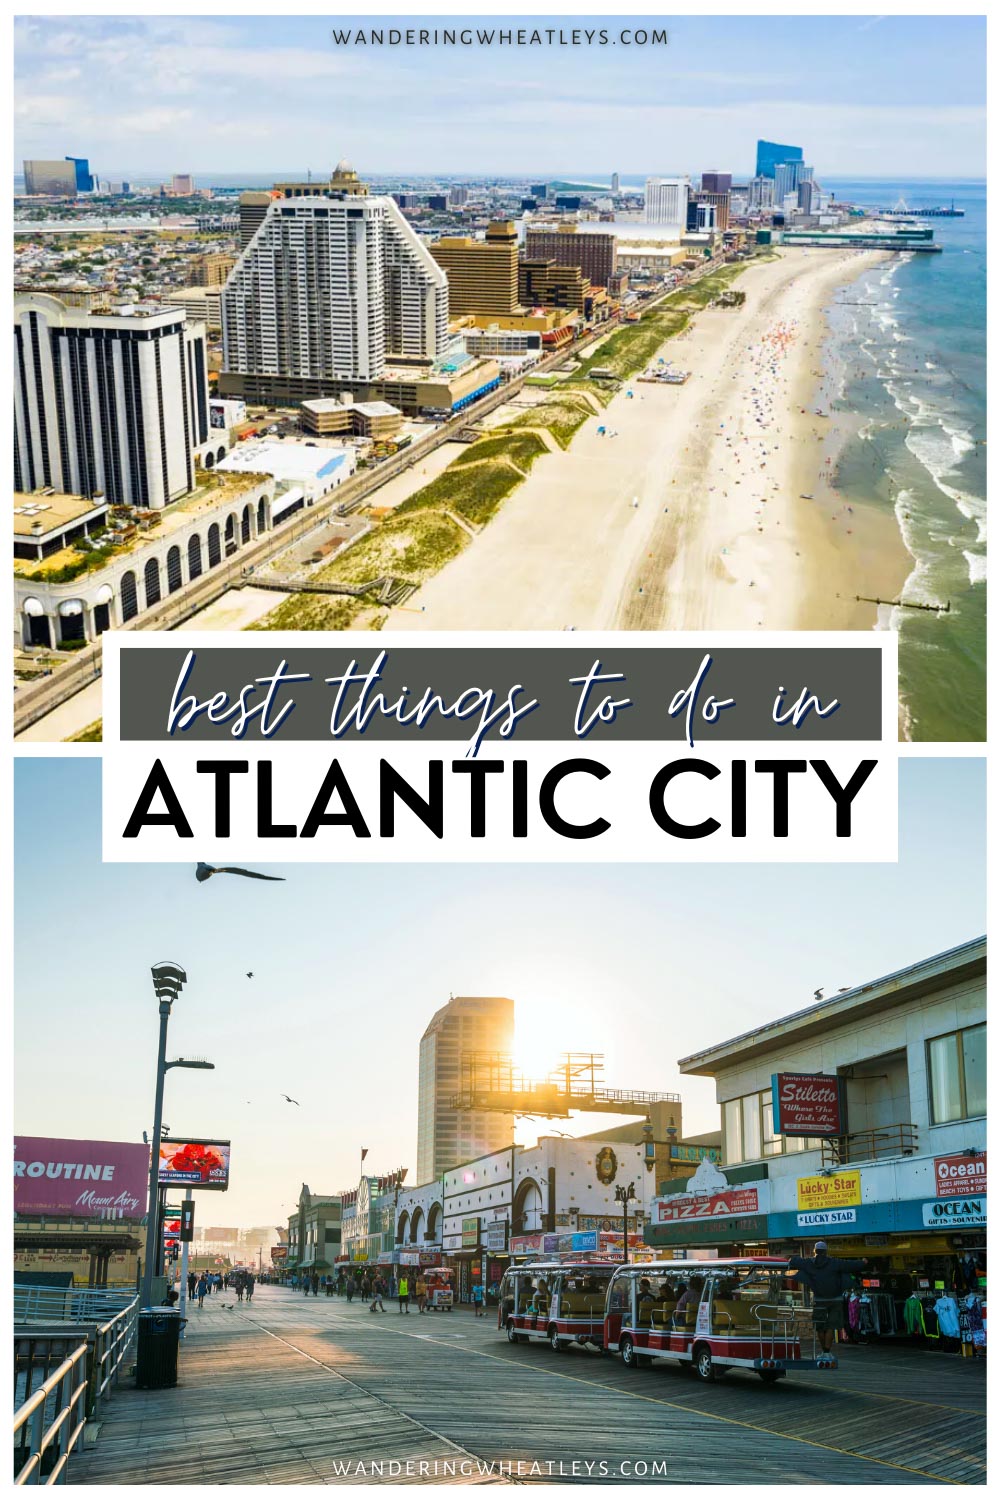 The Best Things to do in Atlantic City